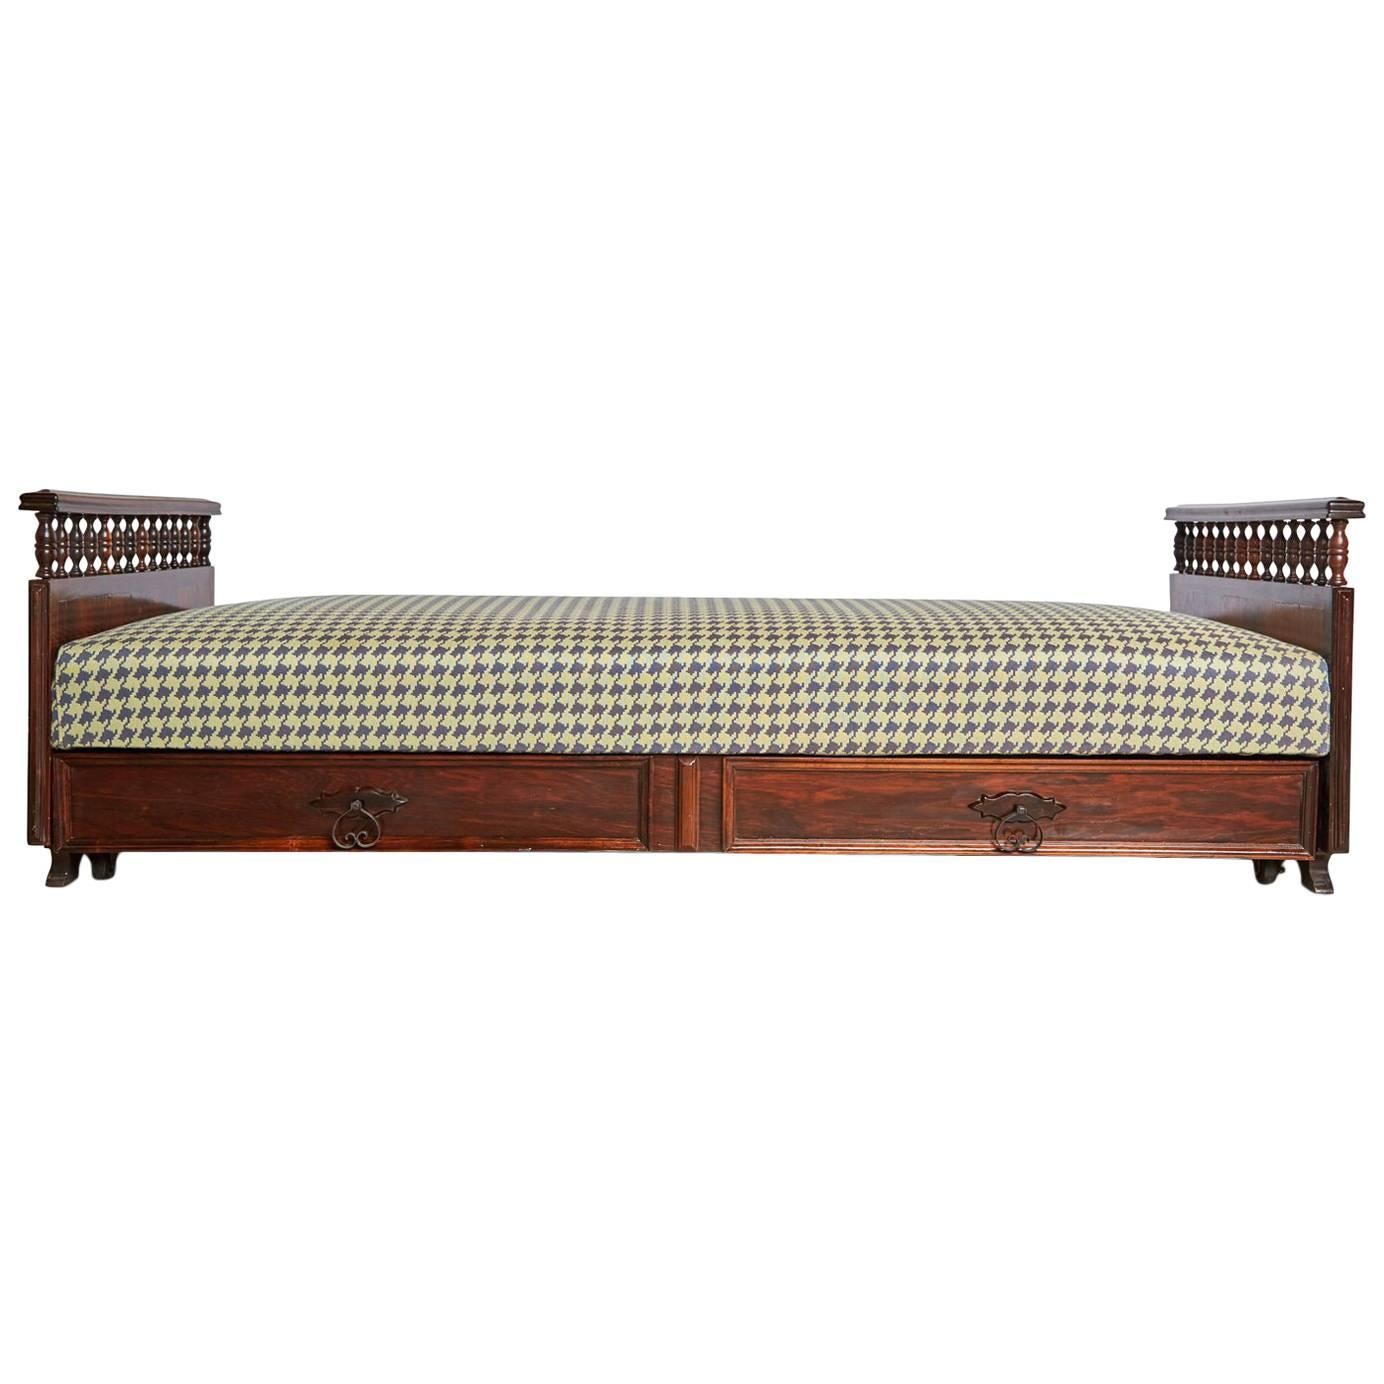 Carved Rosewood Daybed with Pull-Out Trundle Bed, circa 1960